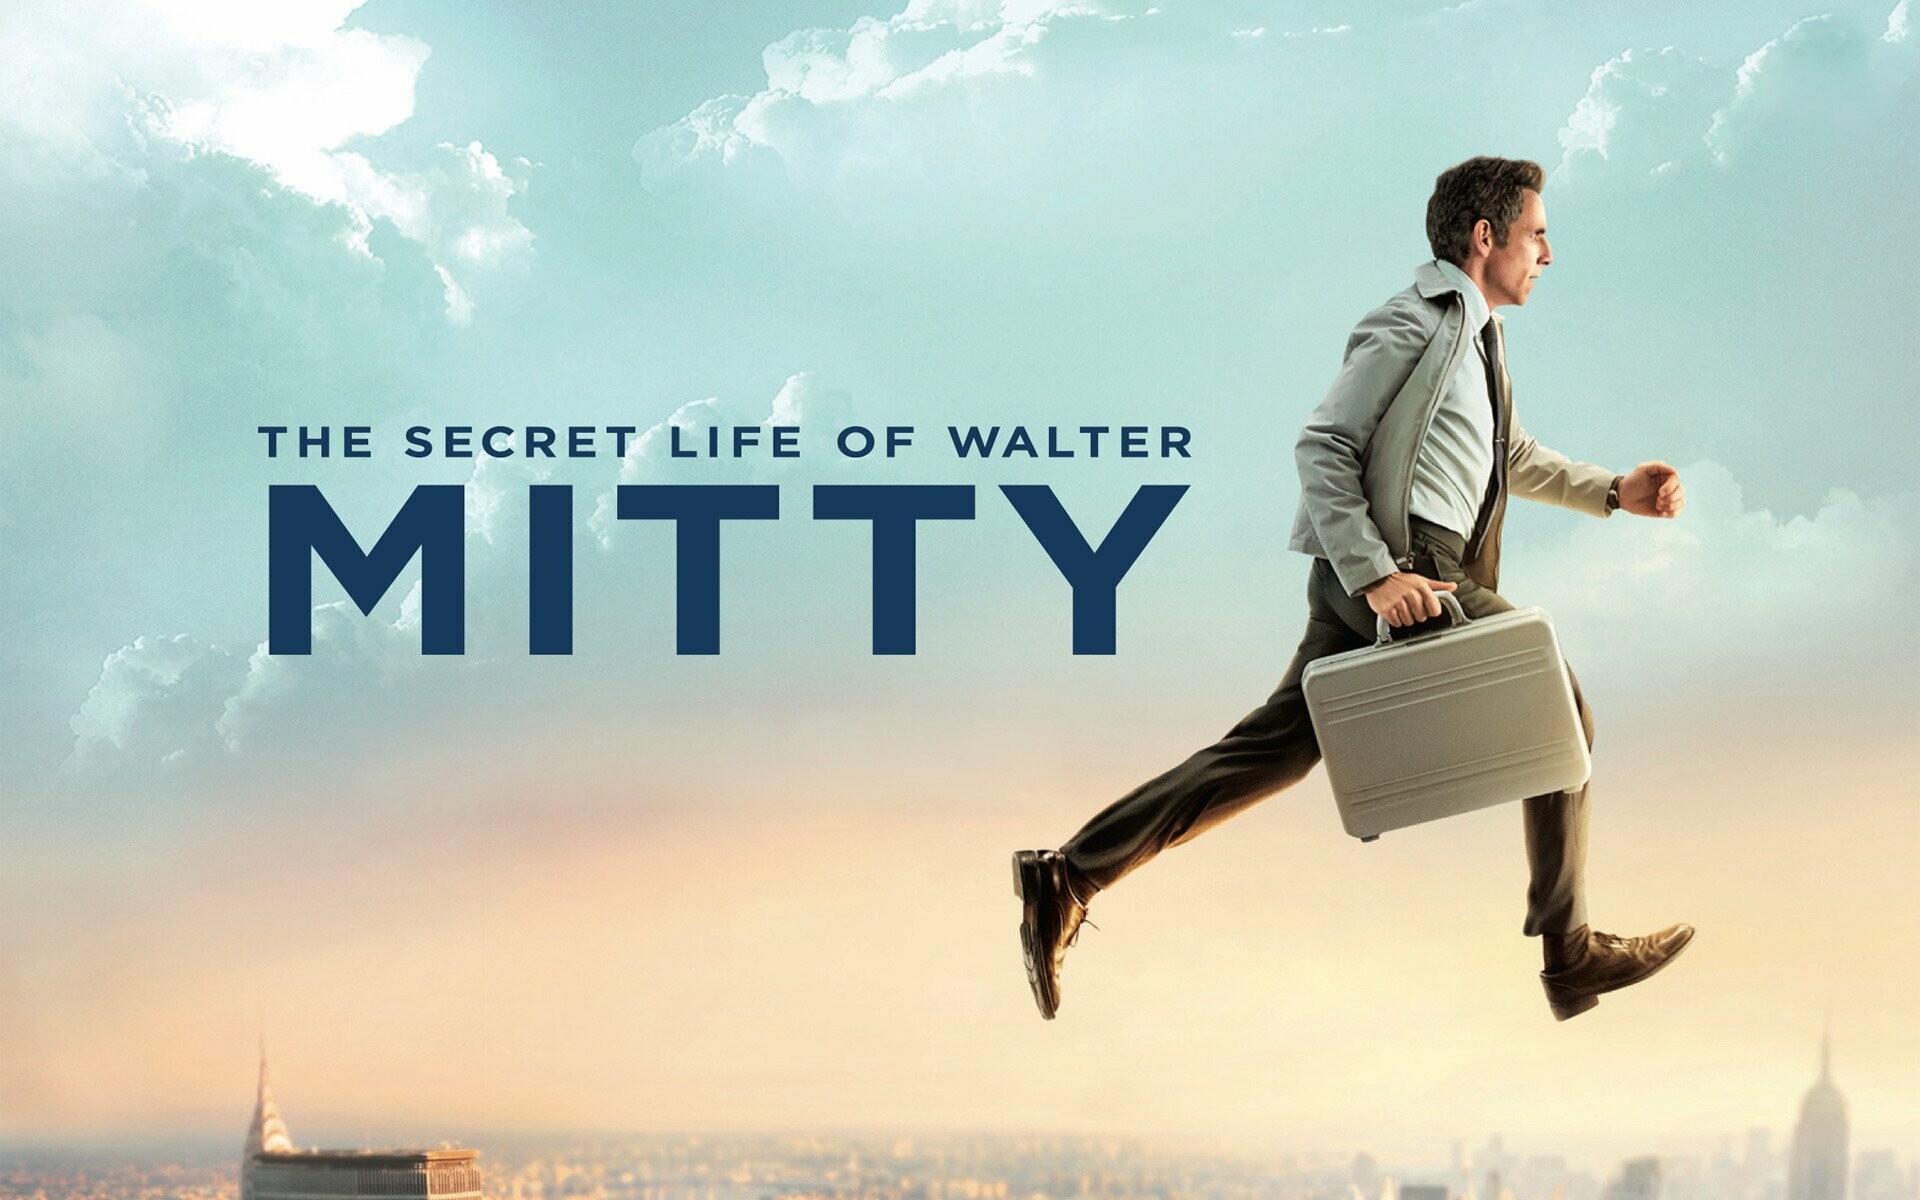 The Secret Life of Walter Mitty: An adaptation of James Thurber’s original two-and-a-half-page short story, Poster. 1920x1200 HD Background.